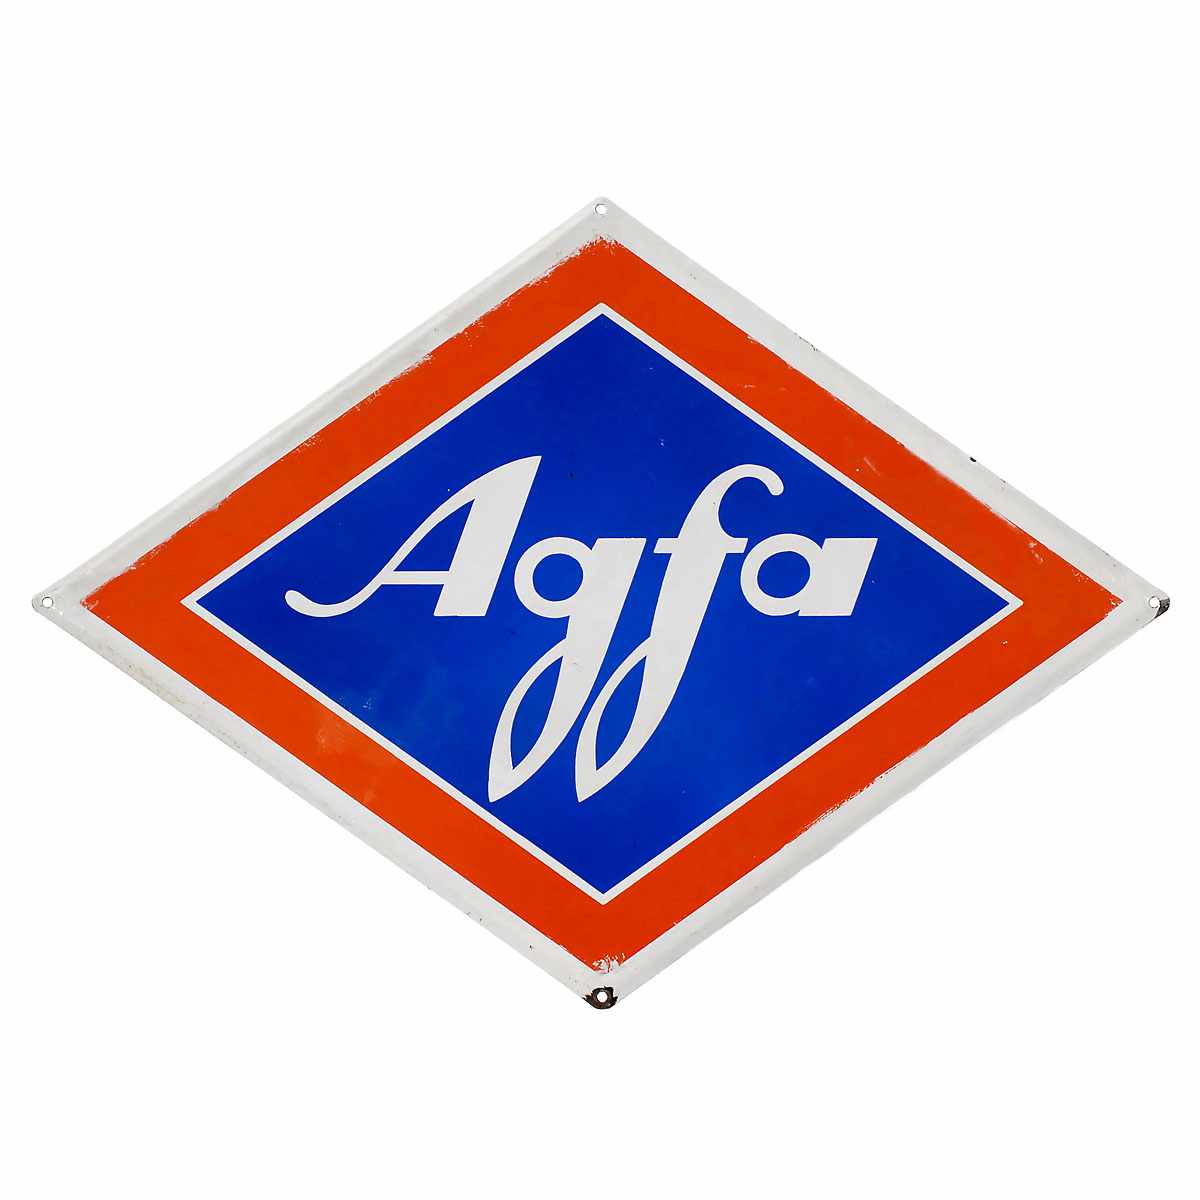 Diamond-Shaped "Agfa" Enamel Advertising Sign, c. 1950 Agfa, slightly arched, 20 x 20 in. Condition: